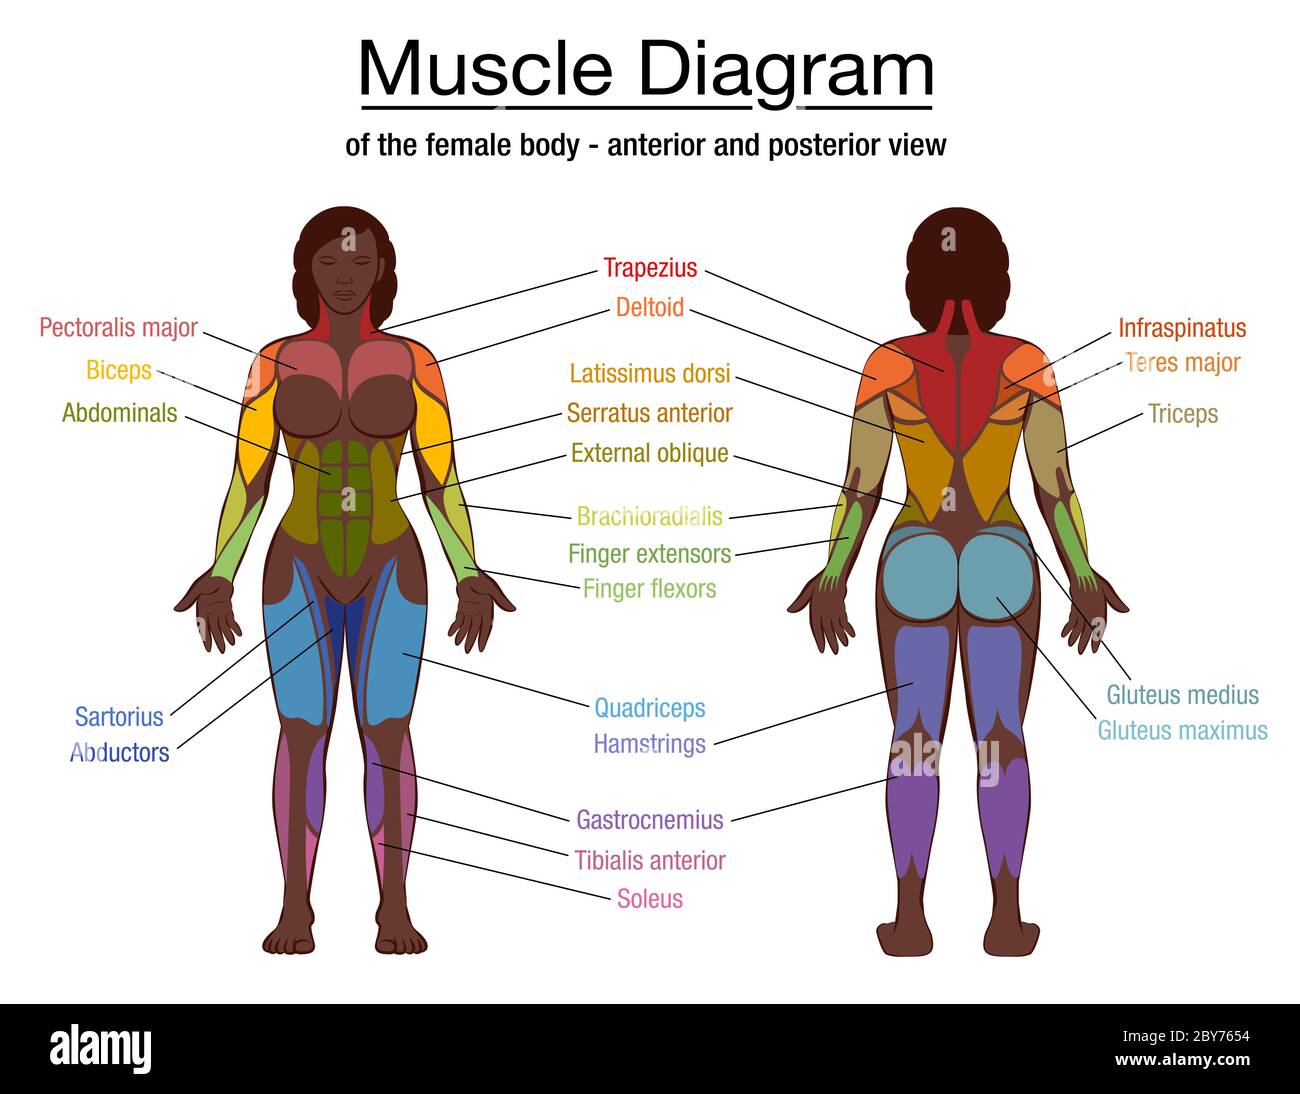 Muscle diagram, most important muscles of an athletic black man, anterior and posterior view, male body. Labeled illustration chart on white. Stock Photo